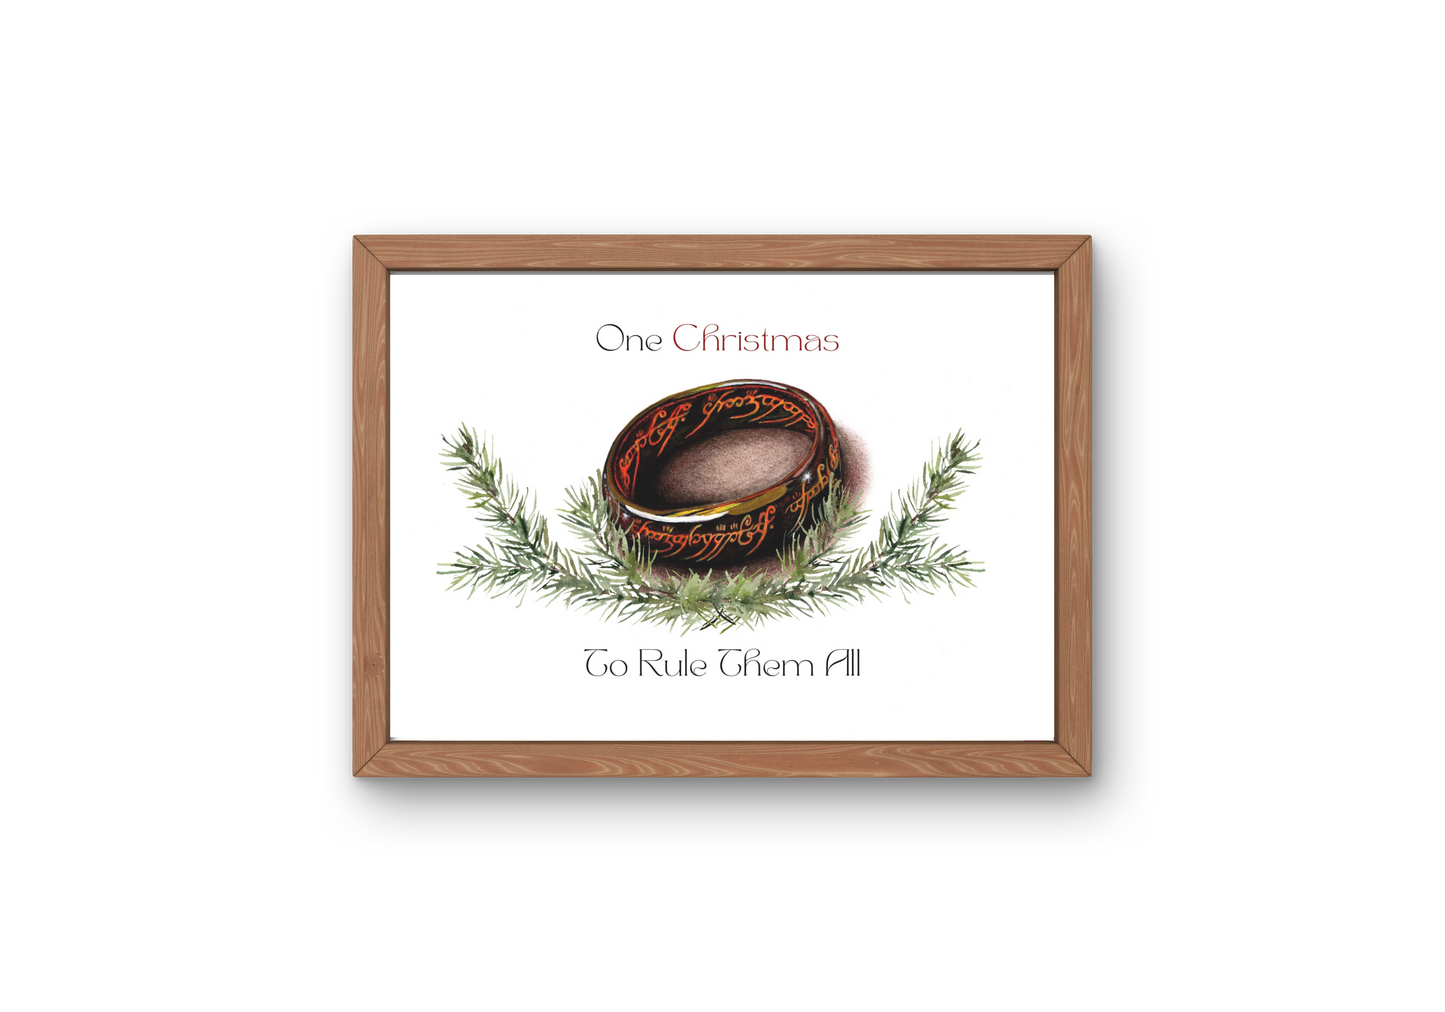 The One Christmas to Rule Them all, Lord of the Rings fan art, Lord of the Rings Christmas, Art print on cardstock